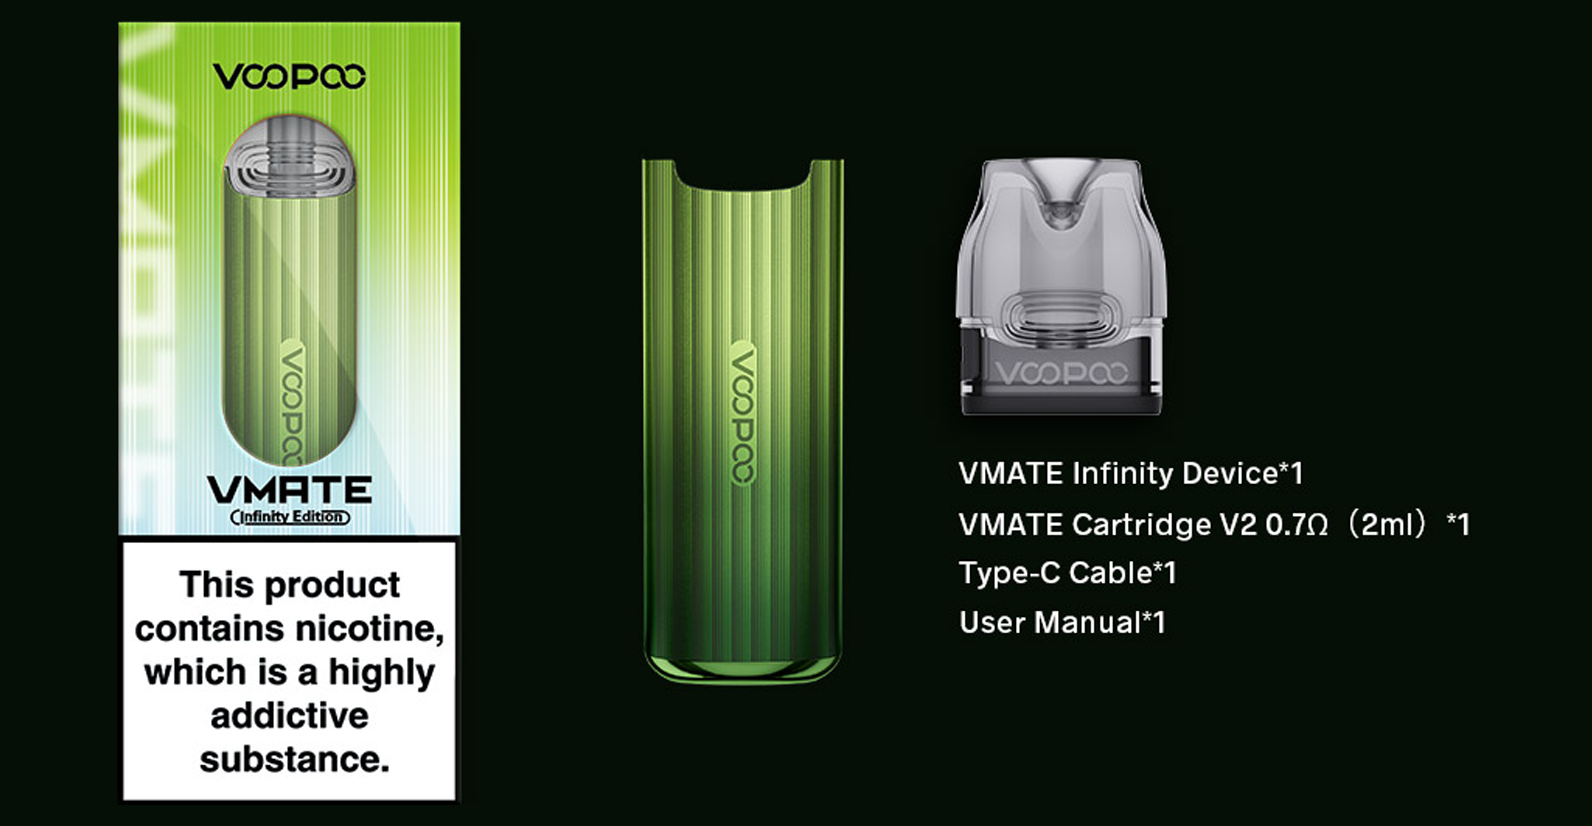 VooPoo VMATE Infinity Edition Pod Kit, VMATE Pod Kit, VMATE Infinity Pod Kit, VMATE Pod Kit In Uk